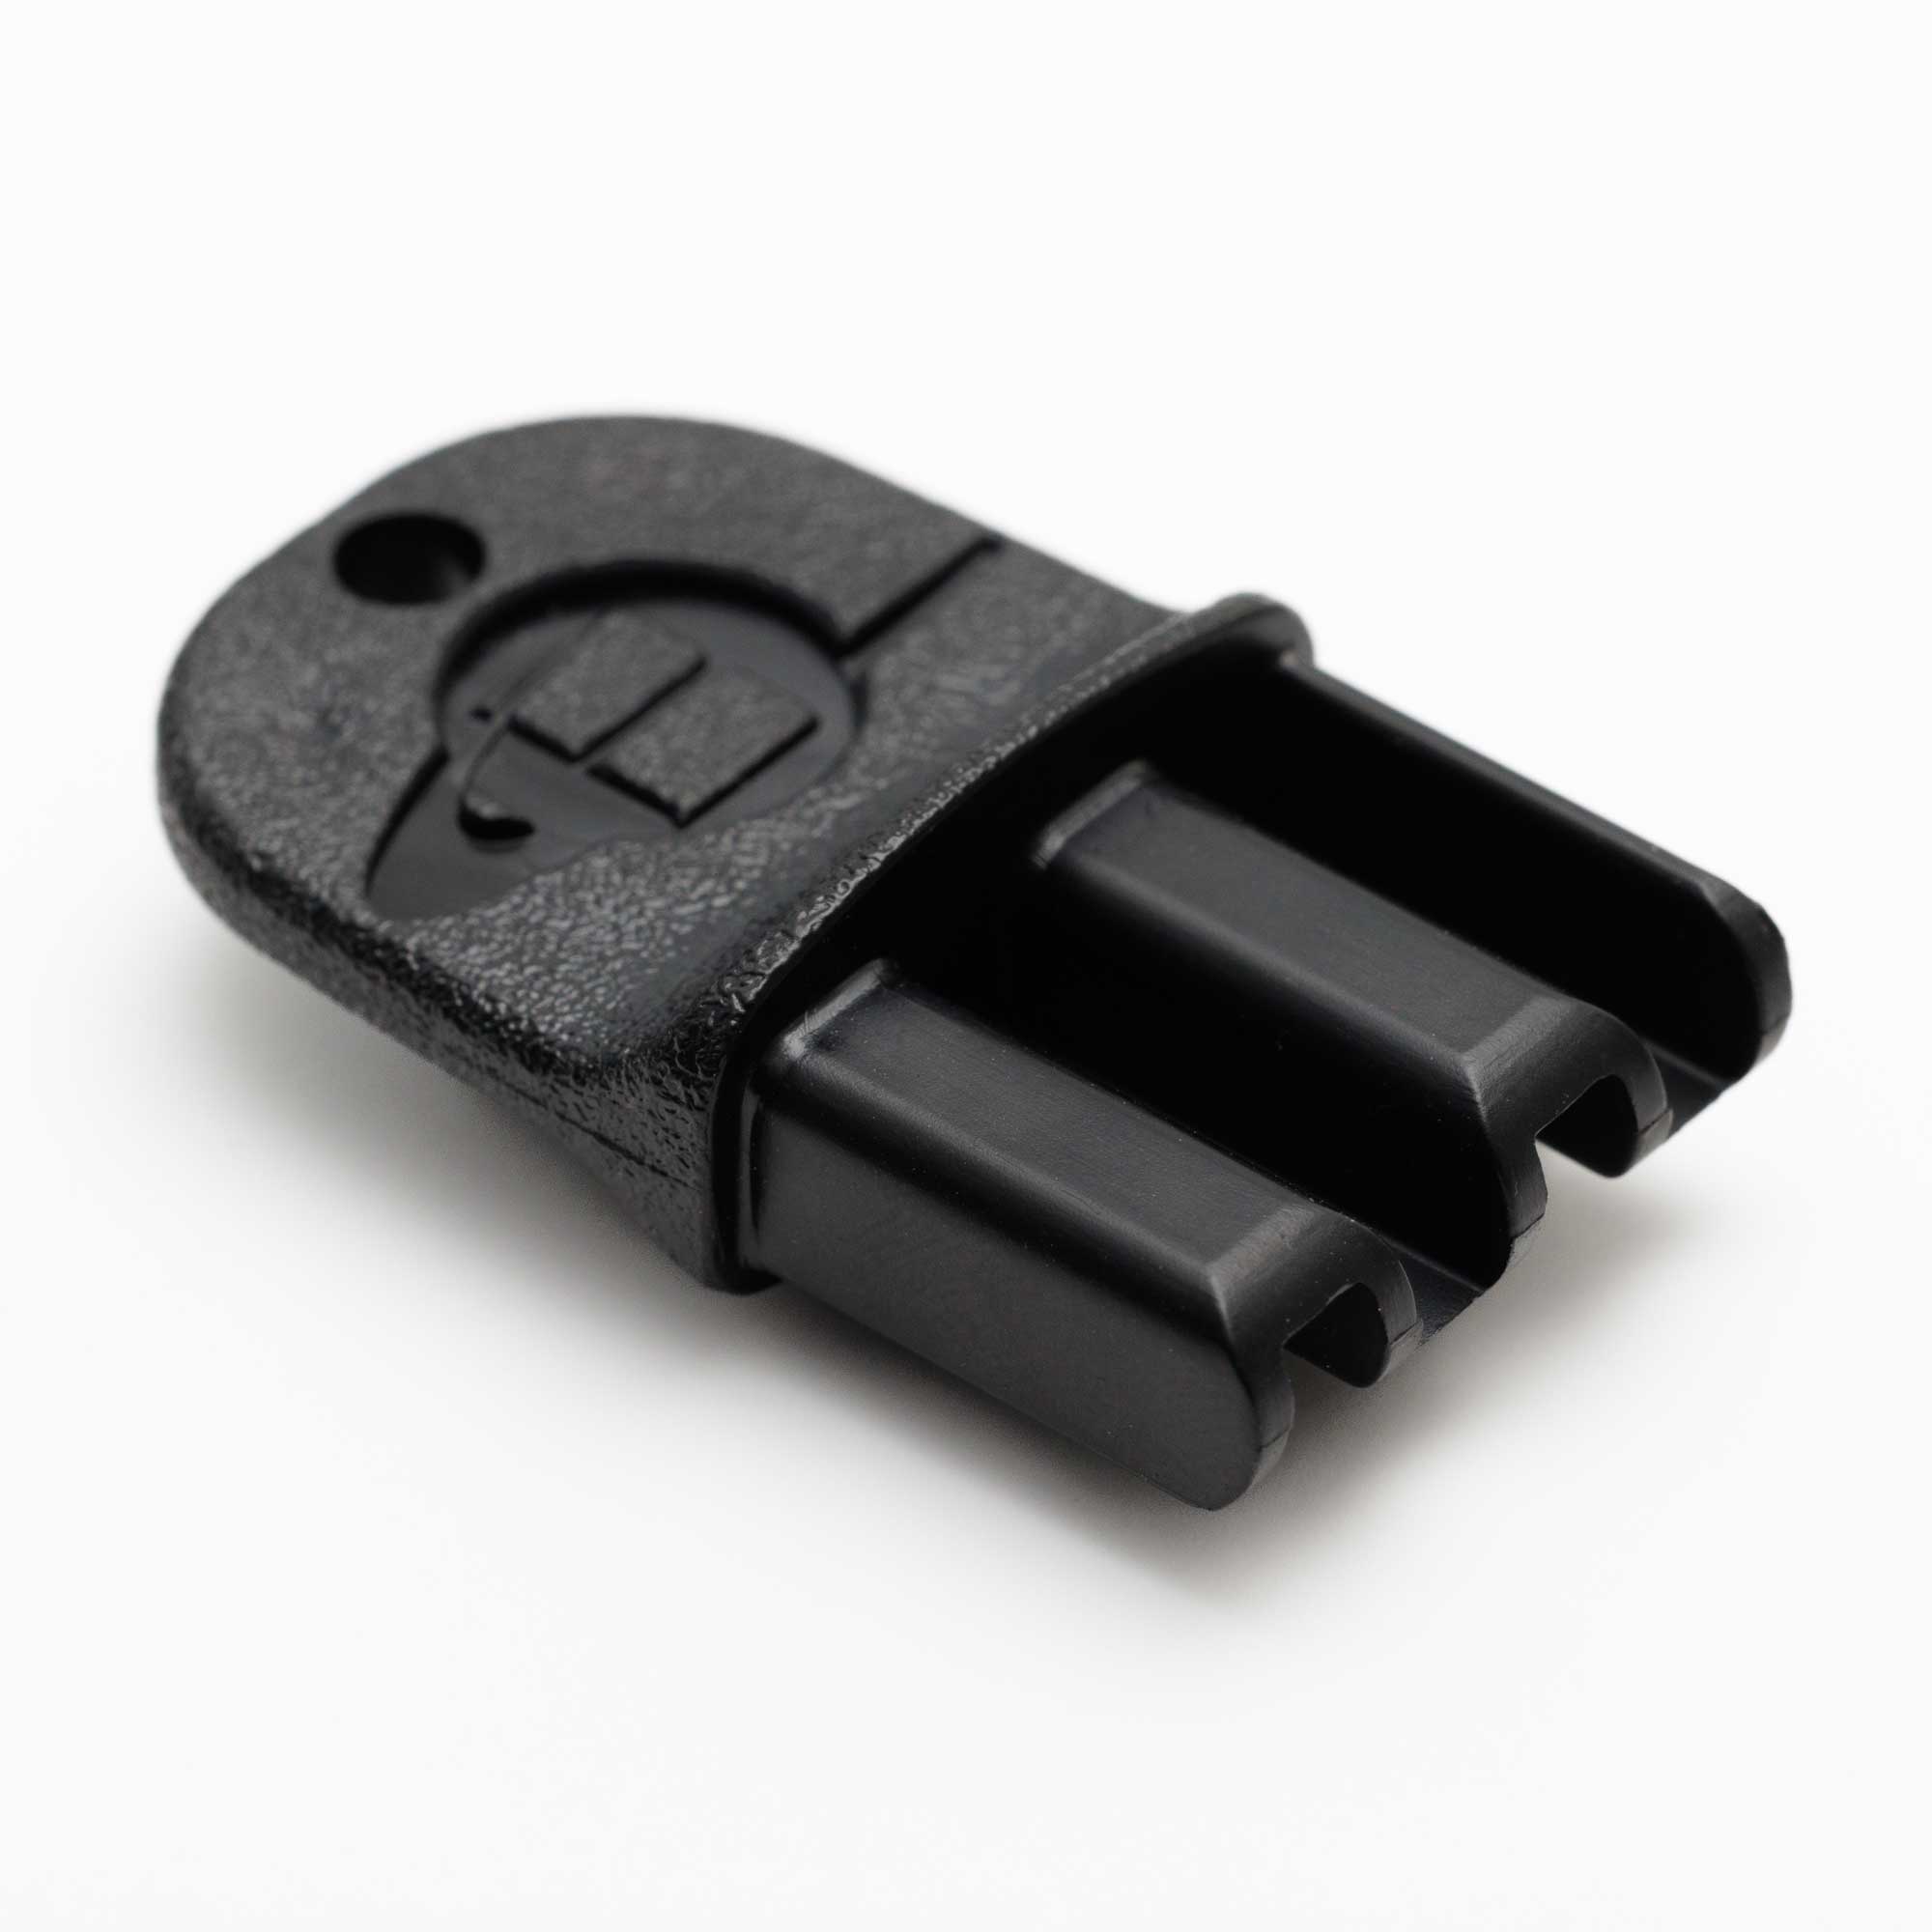  Redtop Replacement Spare Key for Rodent Bait Stations